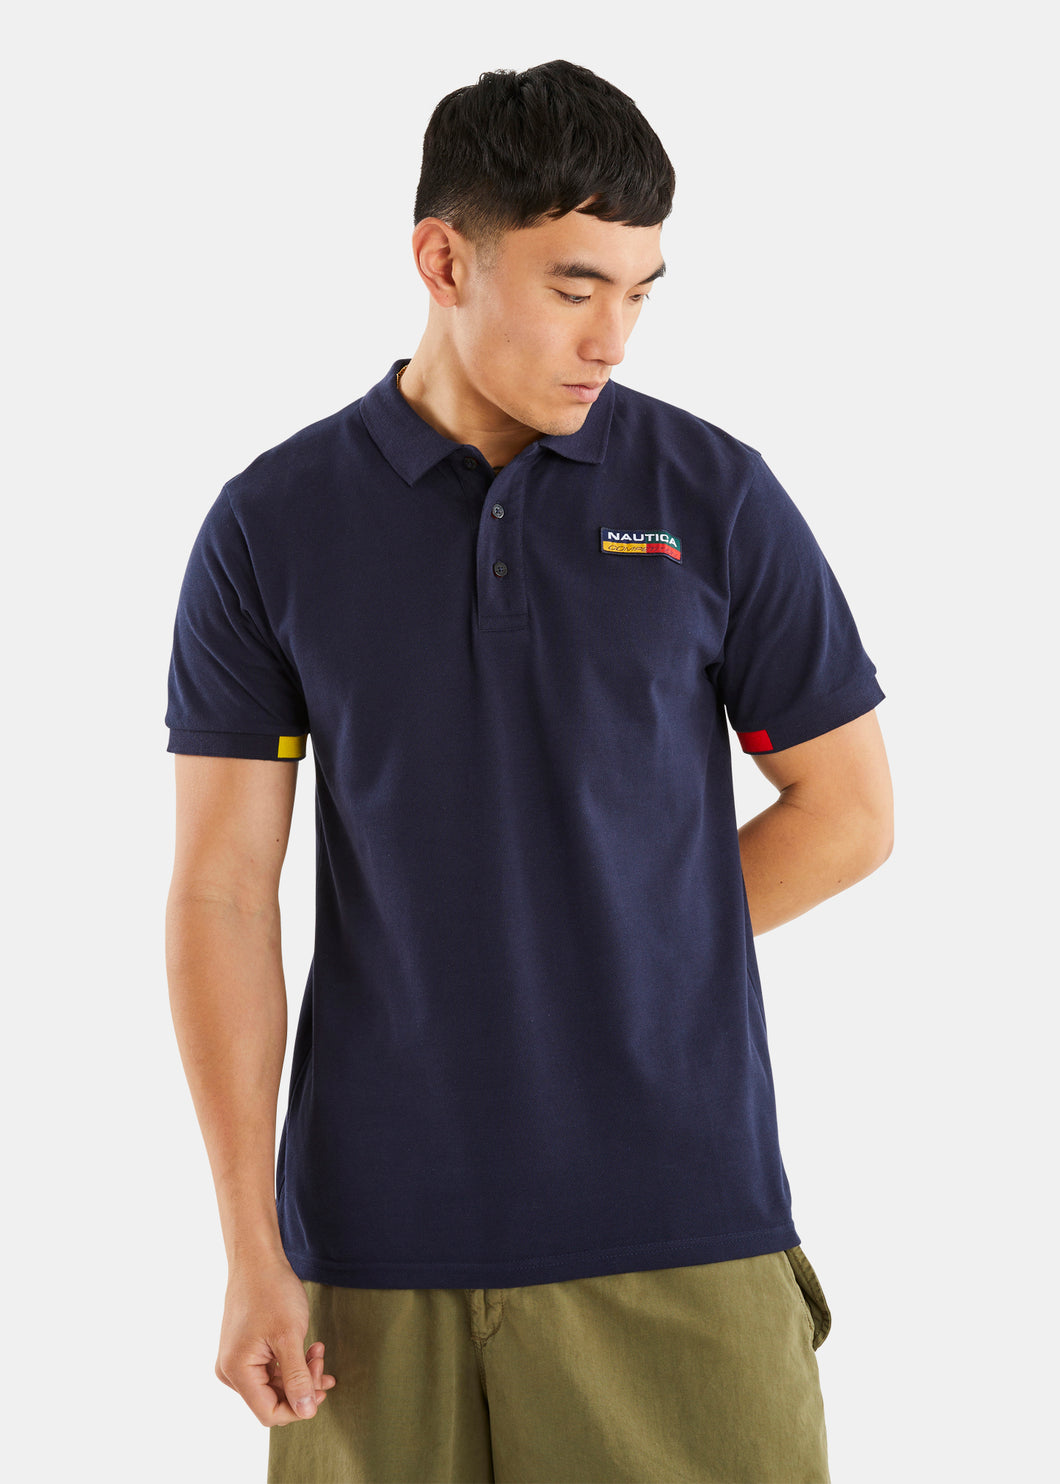 Nautica Competition Philae Polo Shirt - Dark Navy - Front